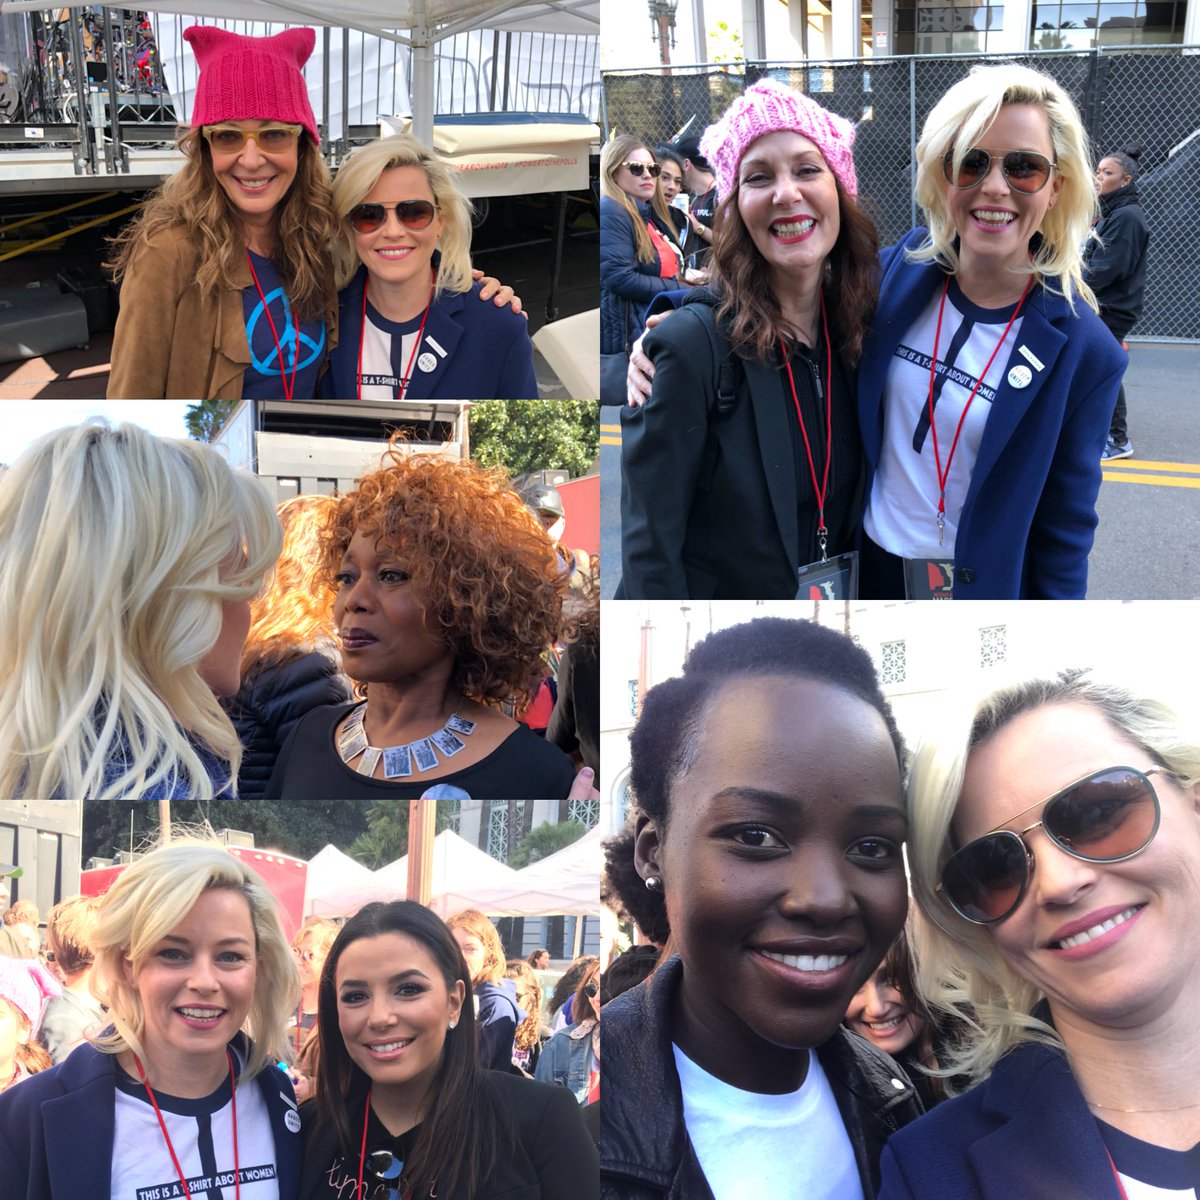 As my favorite sign said: Vote in the midterms or this is just a 5K! #WMLA2018 @womensmarch #PowerToThePolls https://t.co/tpWC35aMQj